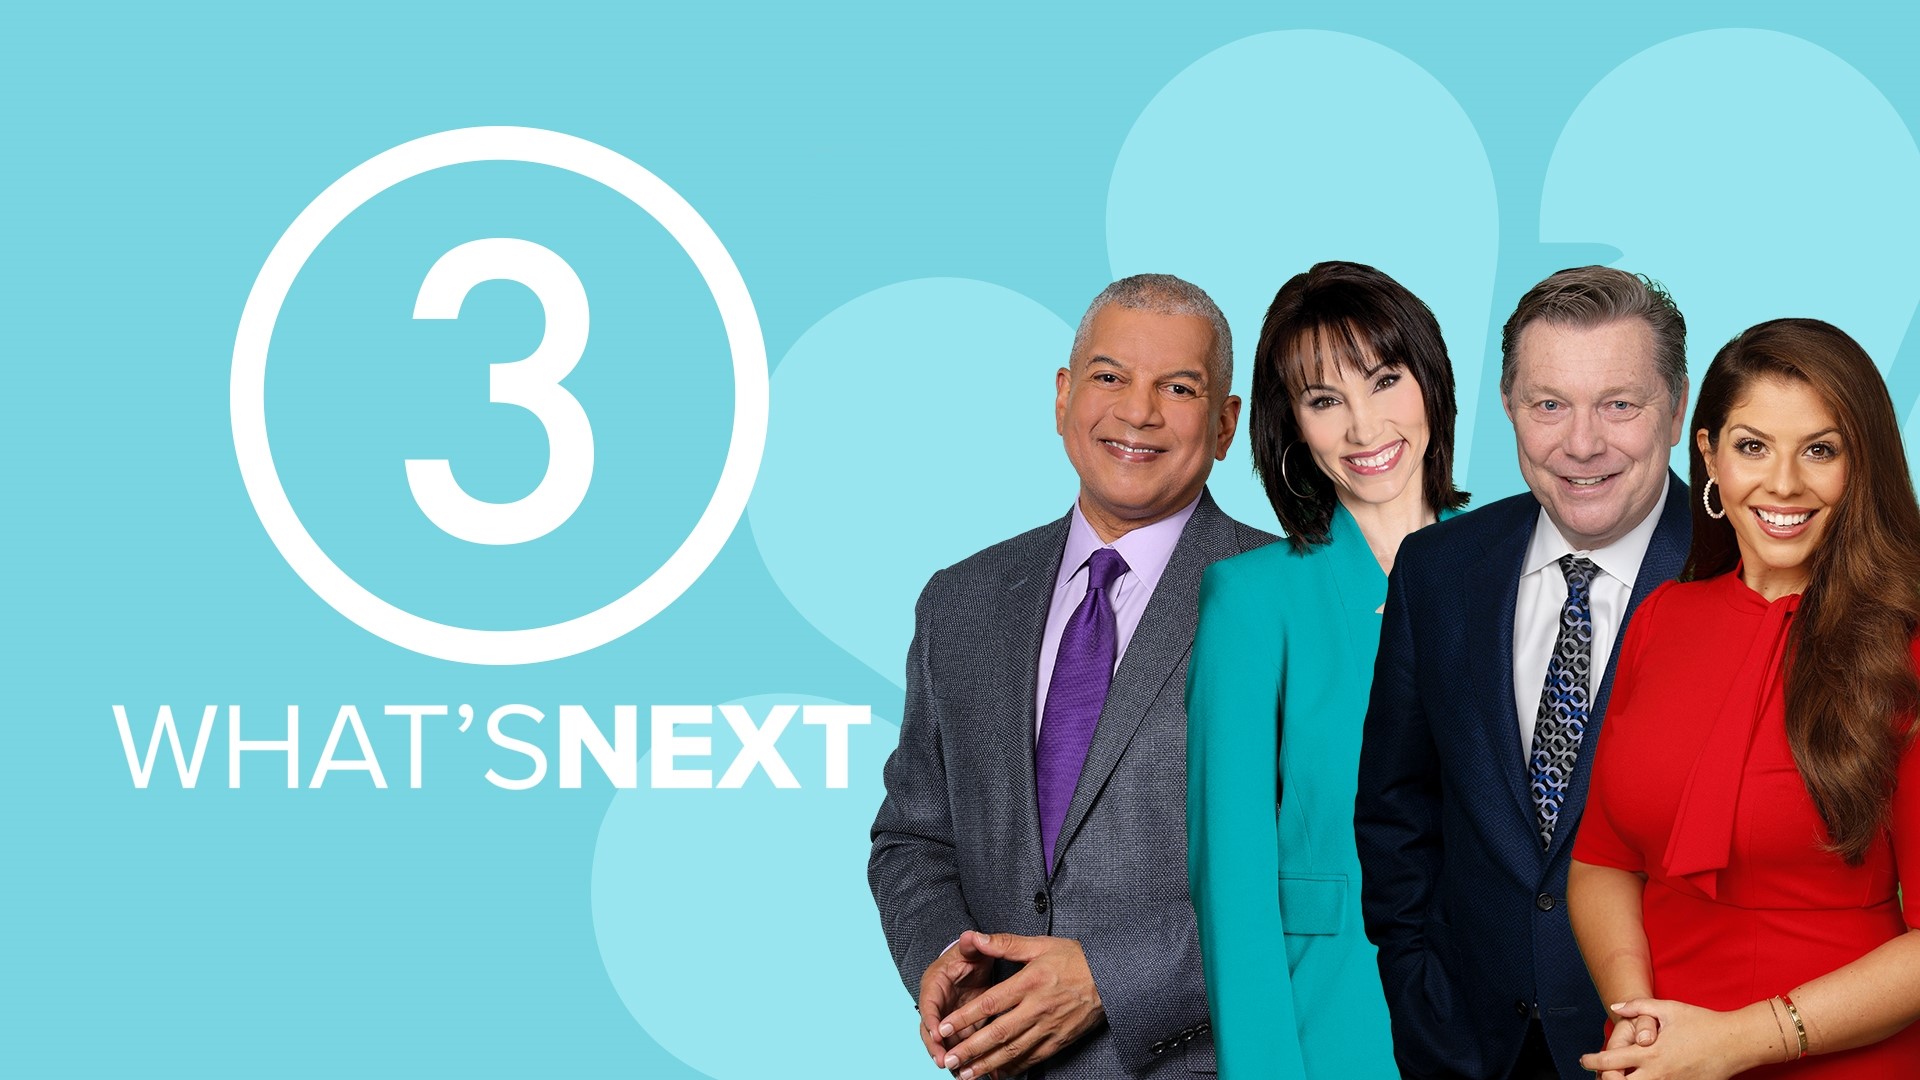 The 3News team looks forward with news features, the overnight weather and tomorrow’s hour-by-hour forecast, and sports updates.